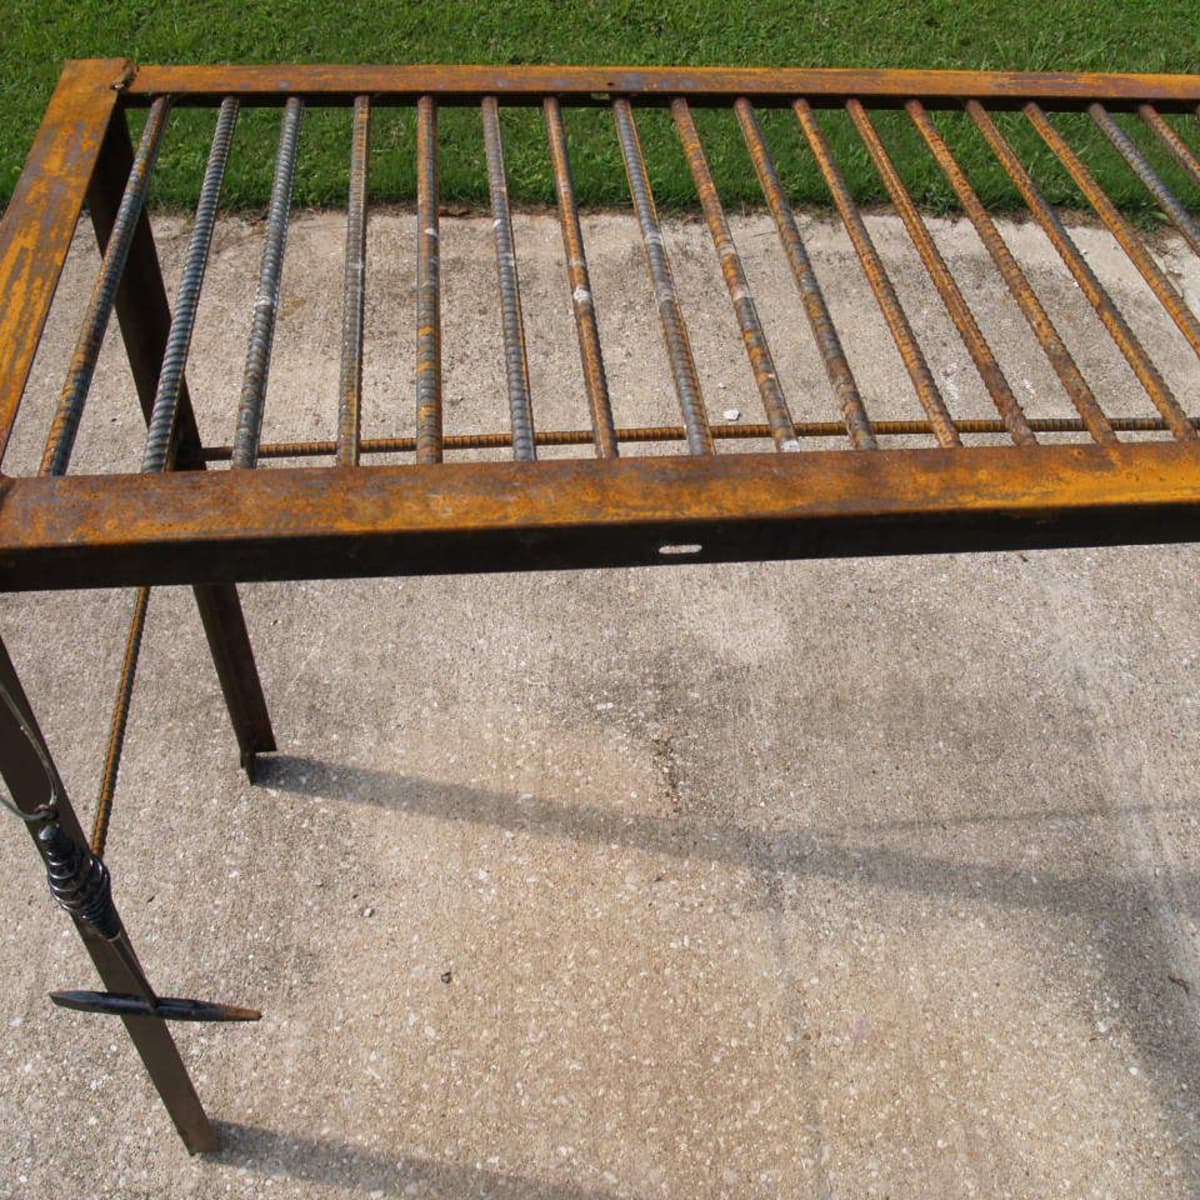 How to Build a Welding Table From Rebar and Bed-Frame Metal - FeltMagnet